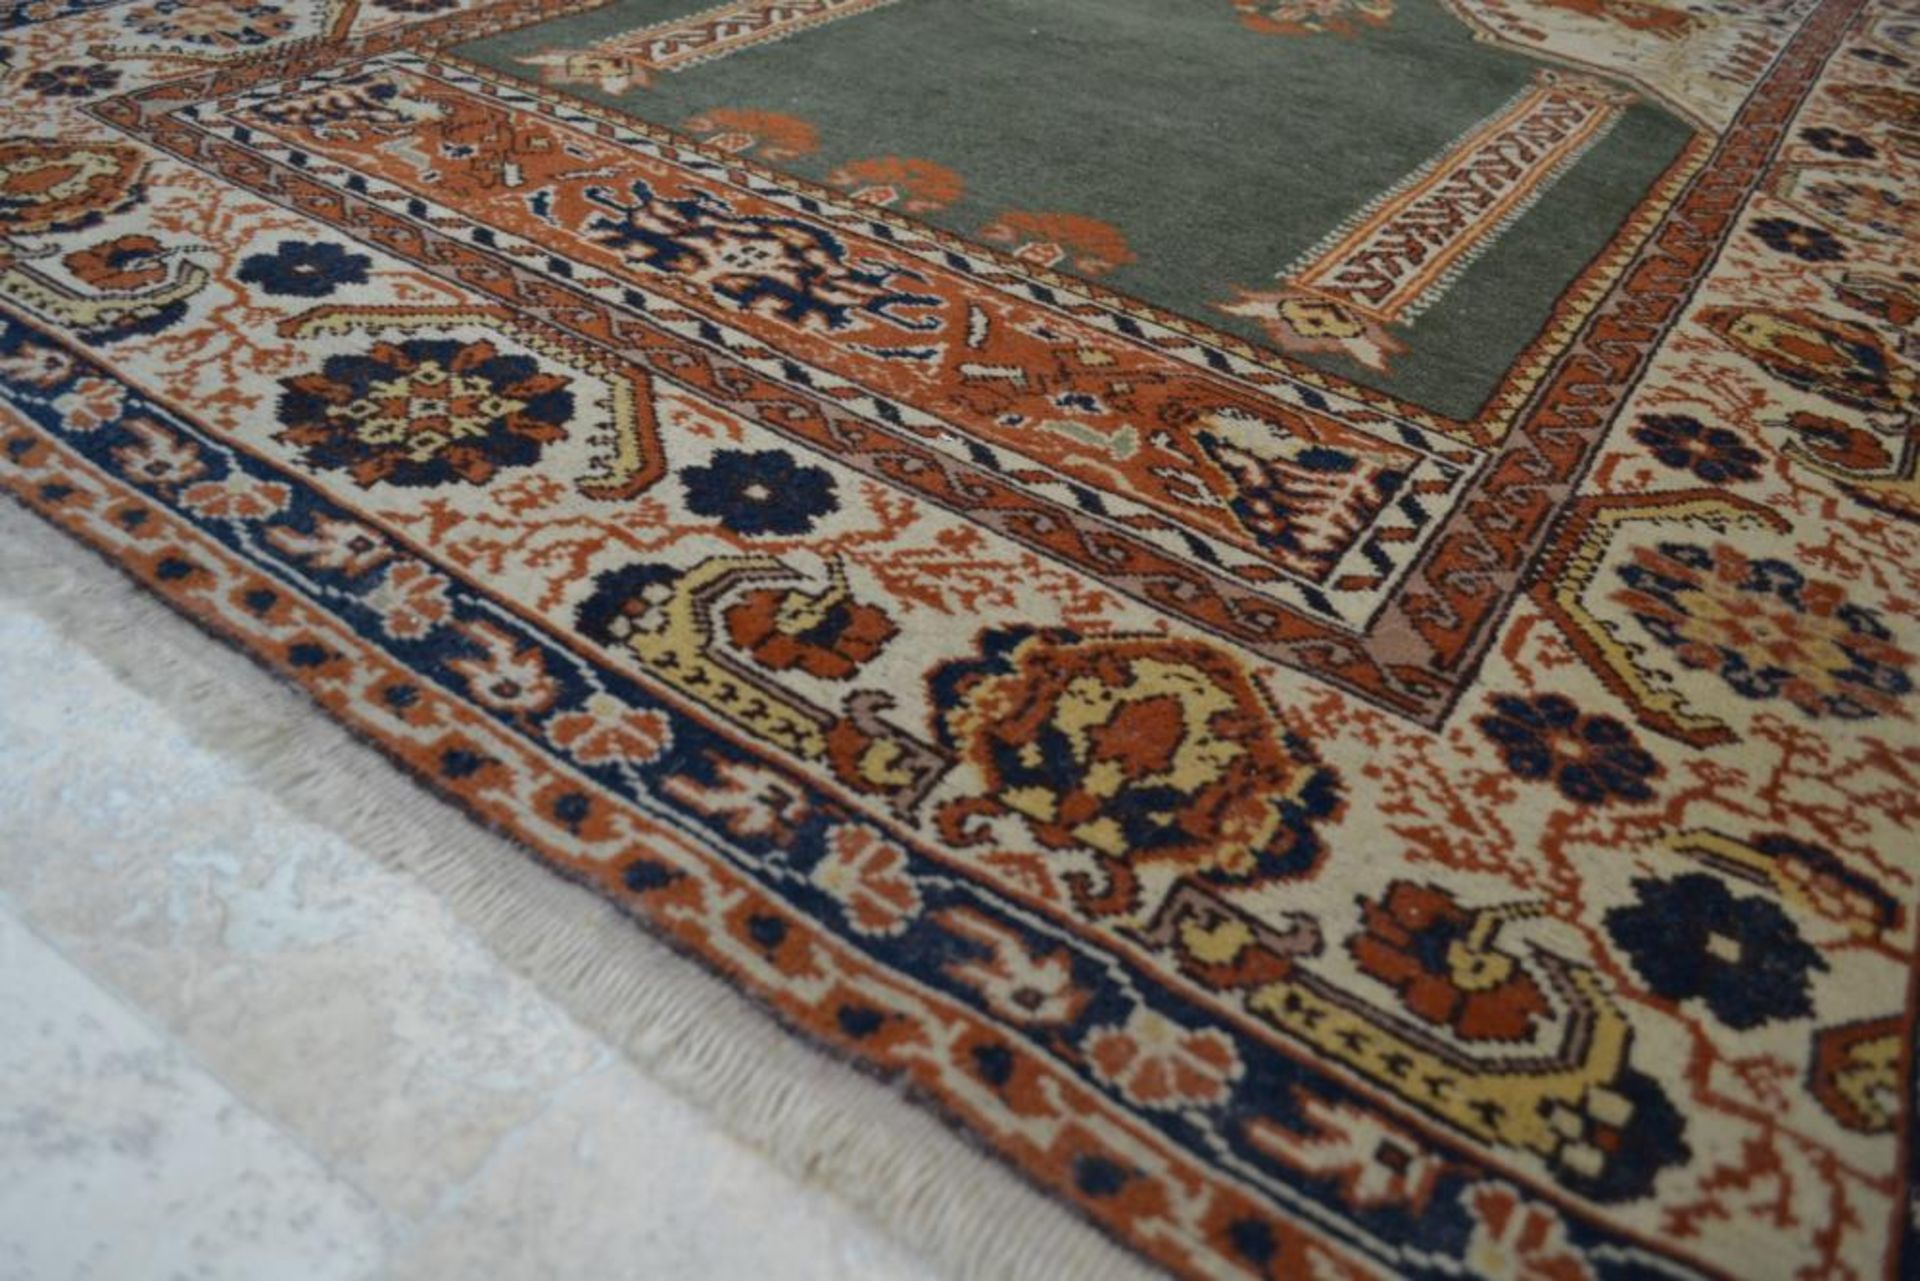 1 x 50 Year Old Turkish Prayer Rug - Vegetable Dyed Wool Foundation & Pile - Dimensions: 200x127cm - - Image 5 of 6